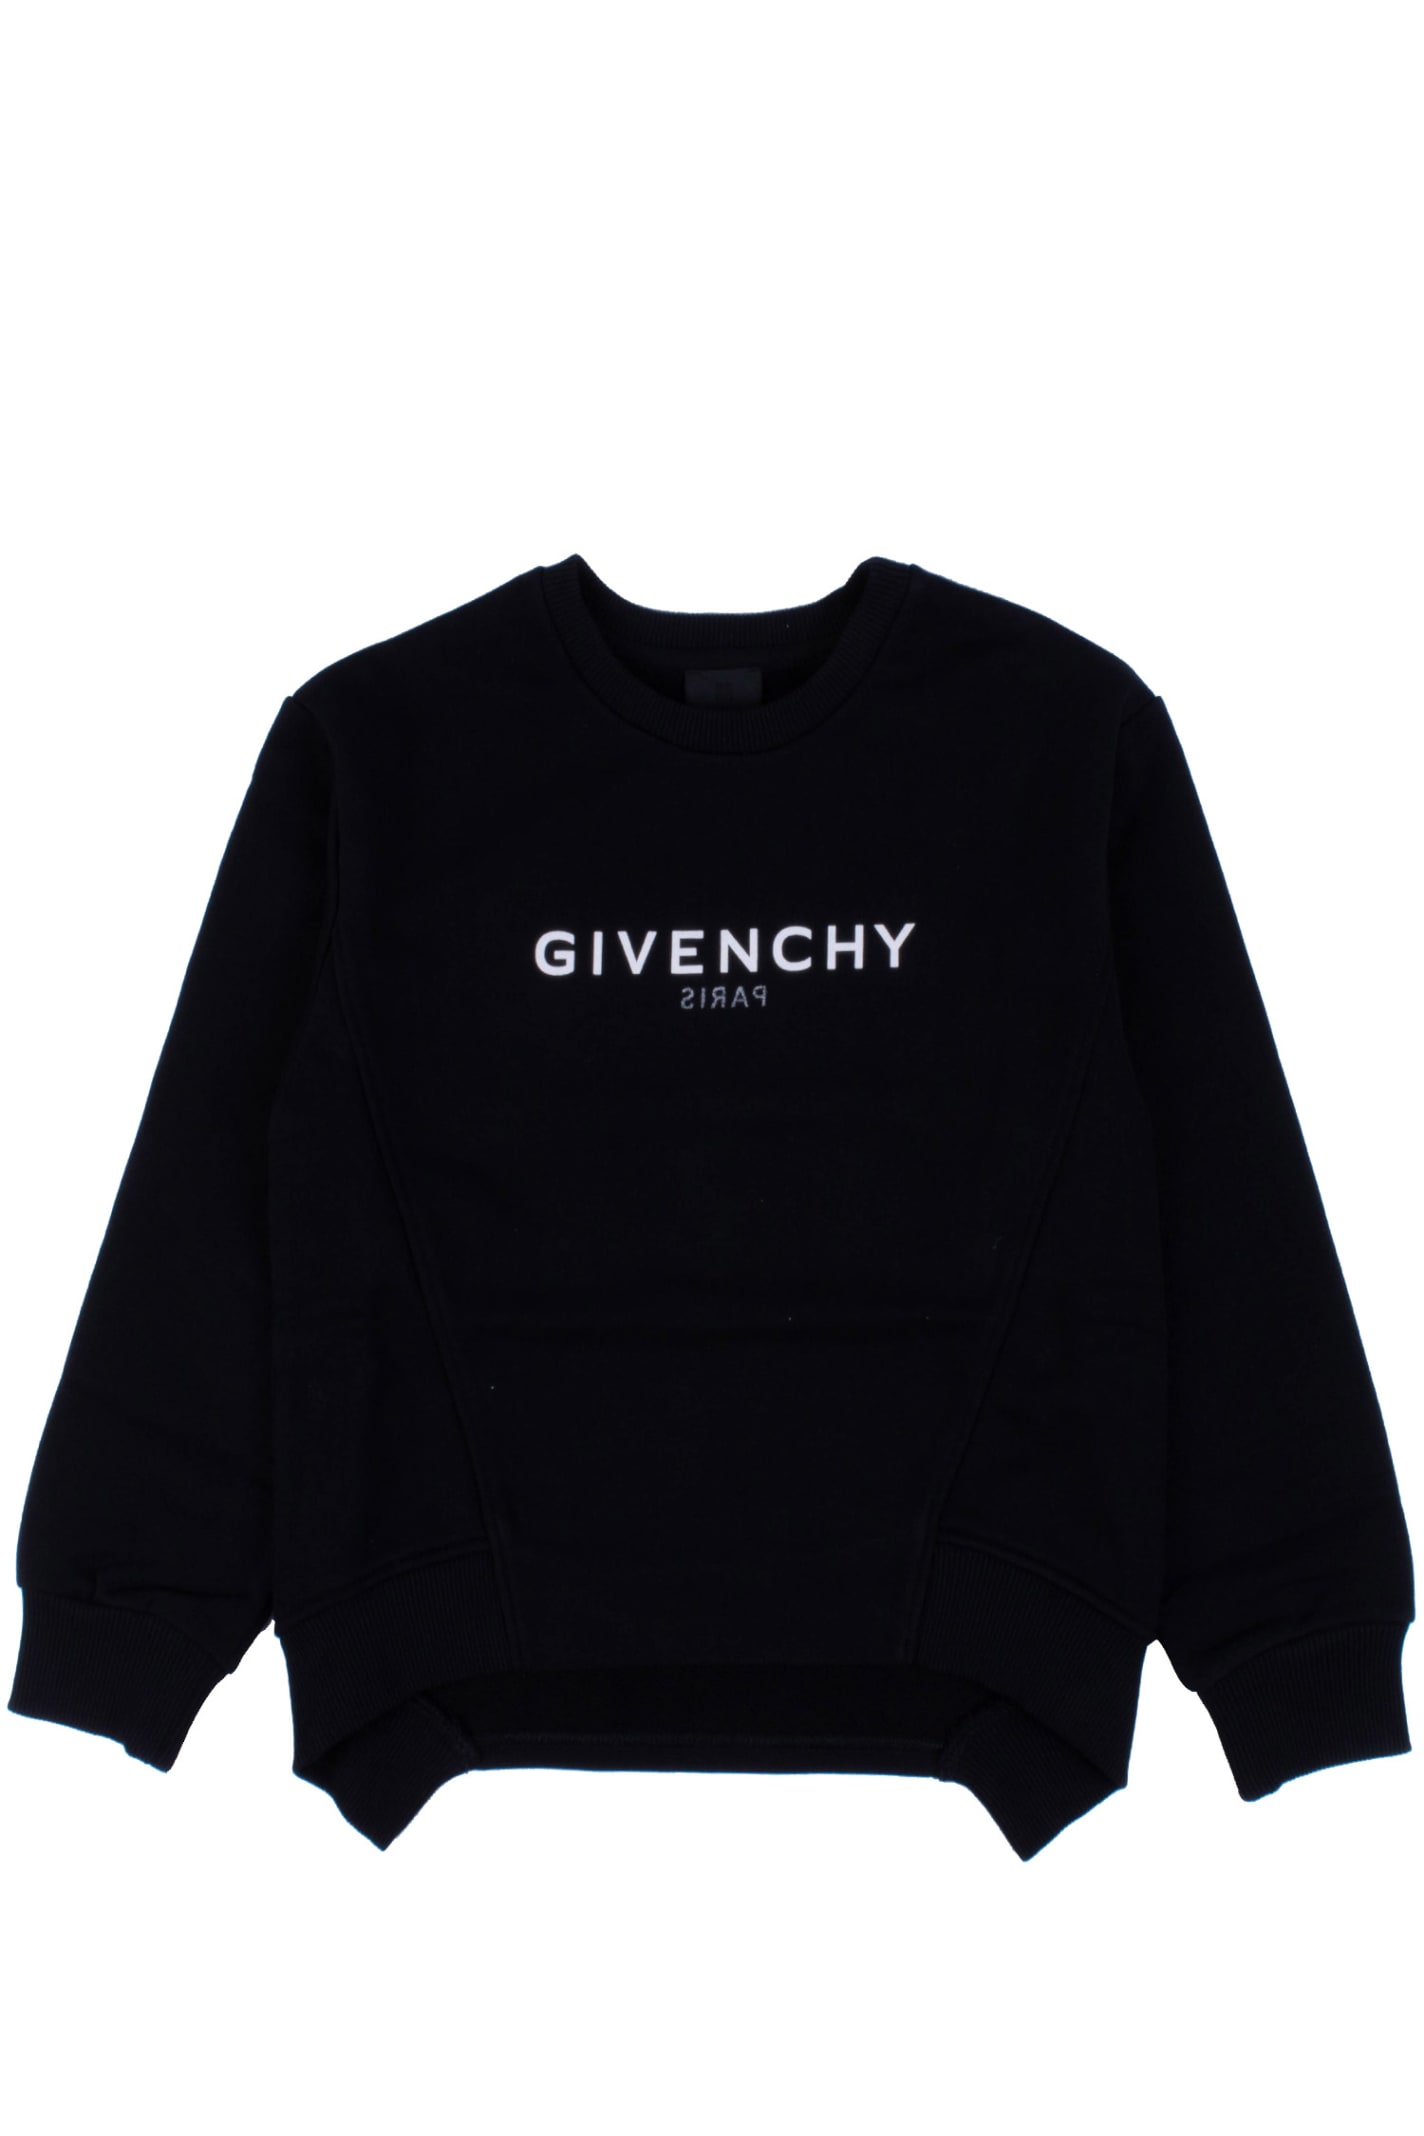 Givenchy Cotton Sweatshirt With Print